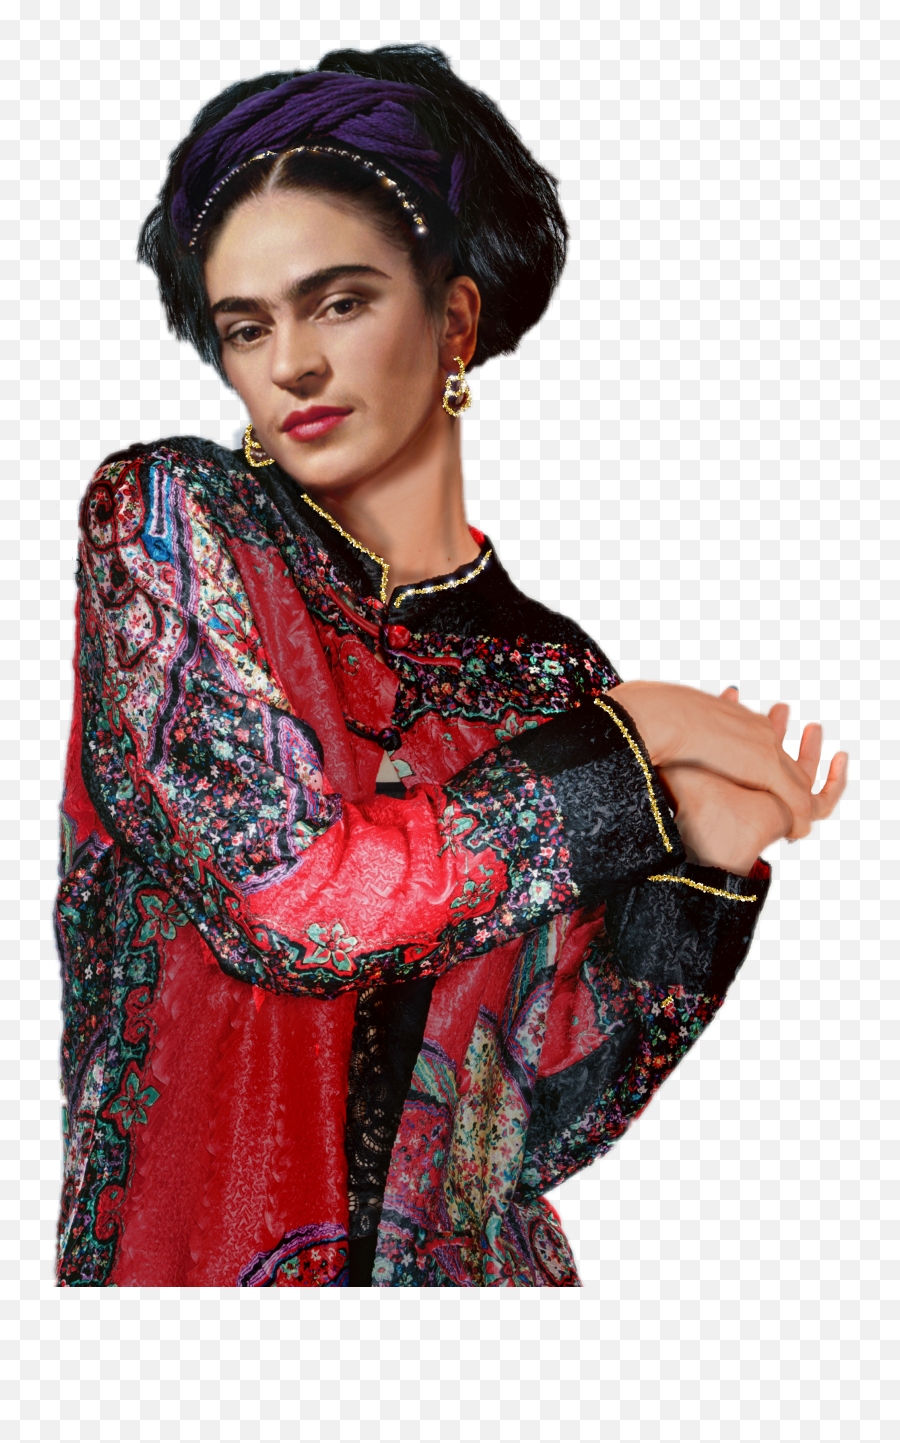 Largest Collection Of Free - Toedit Unibrow Stickers On Picsart Frida Kahlo Hd Png Emoji,Unibrow Emoji